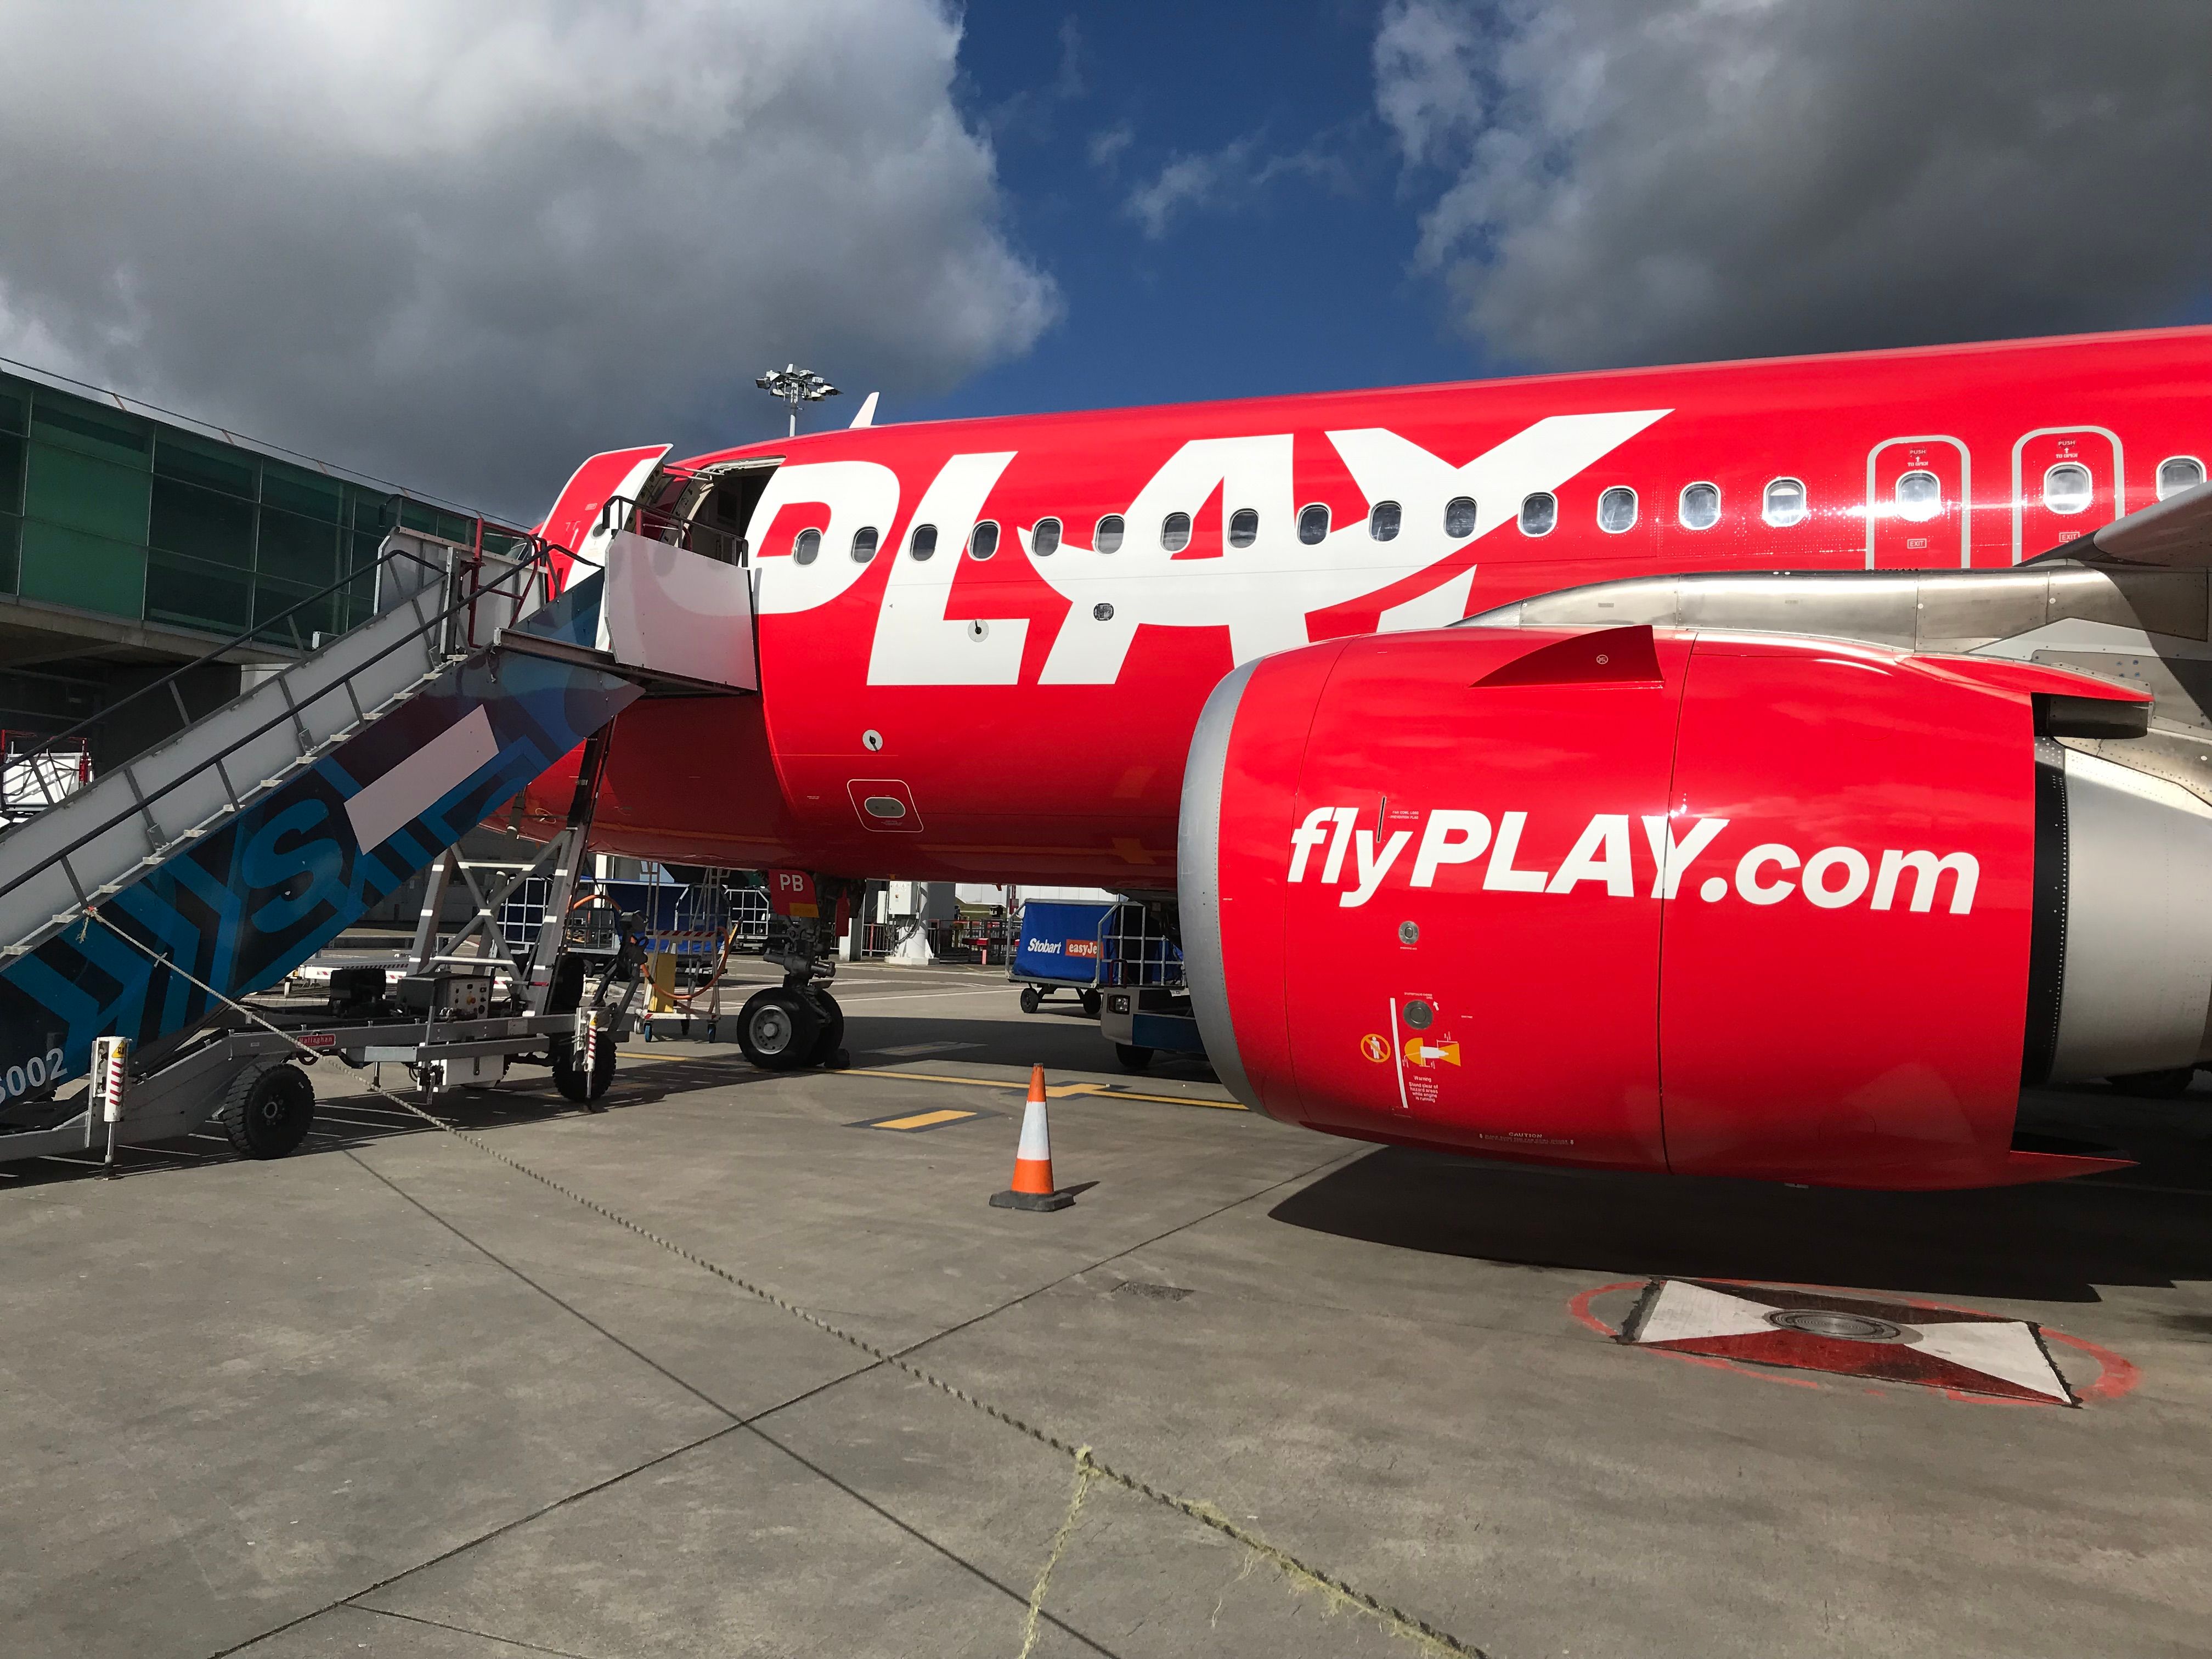 A Play Airbus A320neo, registration TF-PPB, parked at the gate.